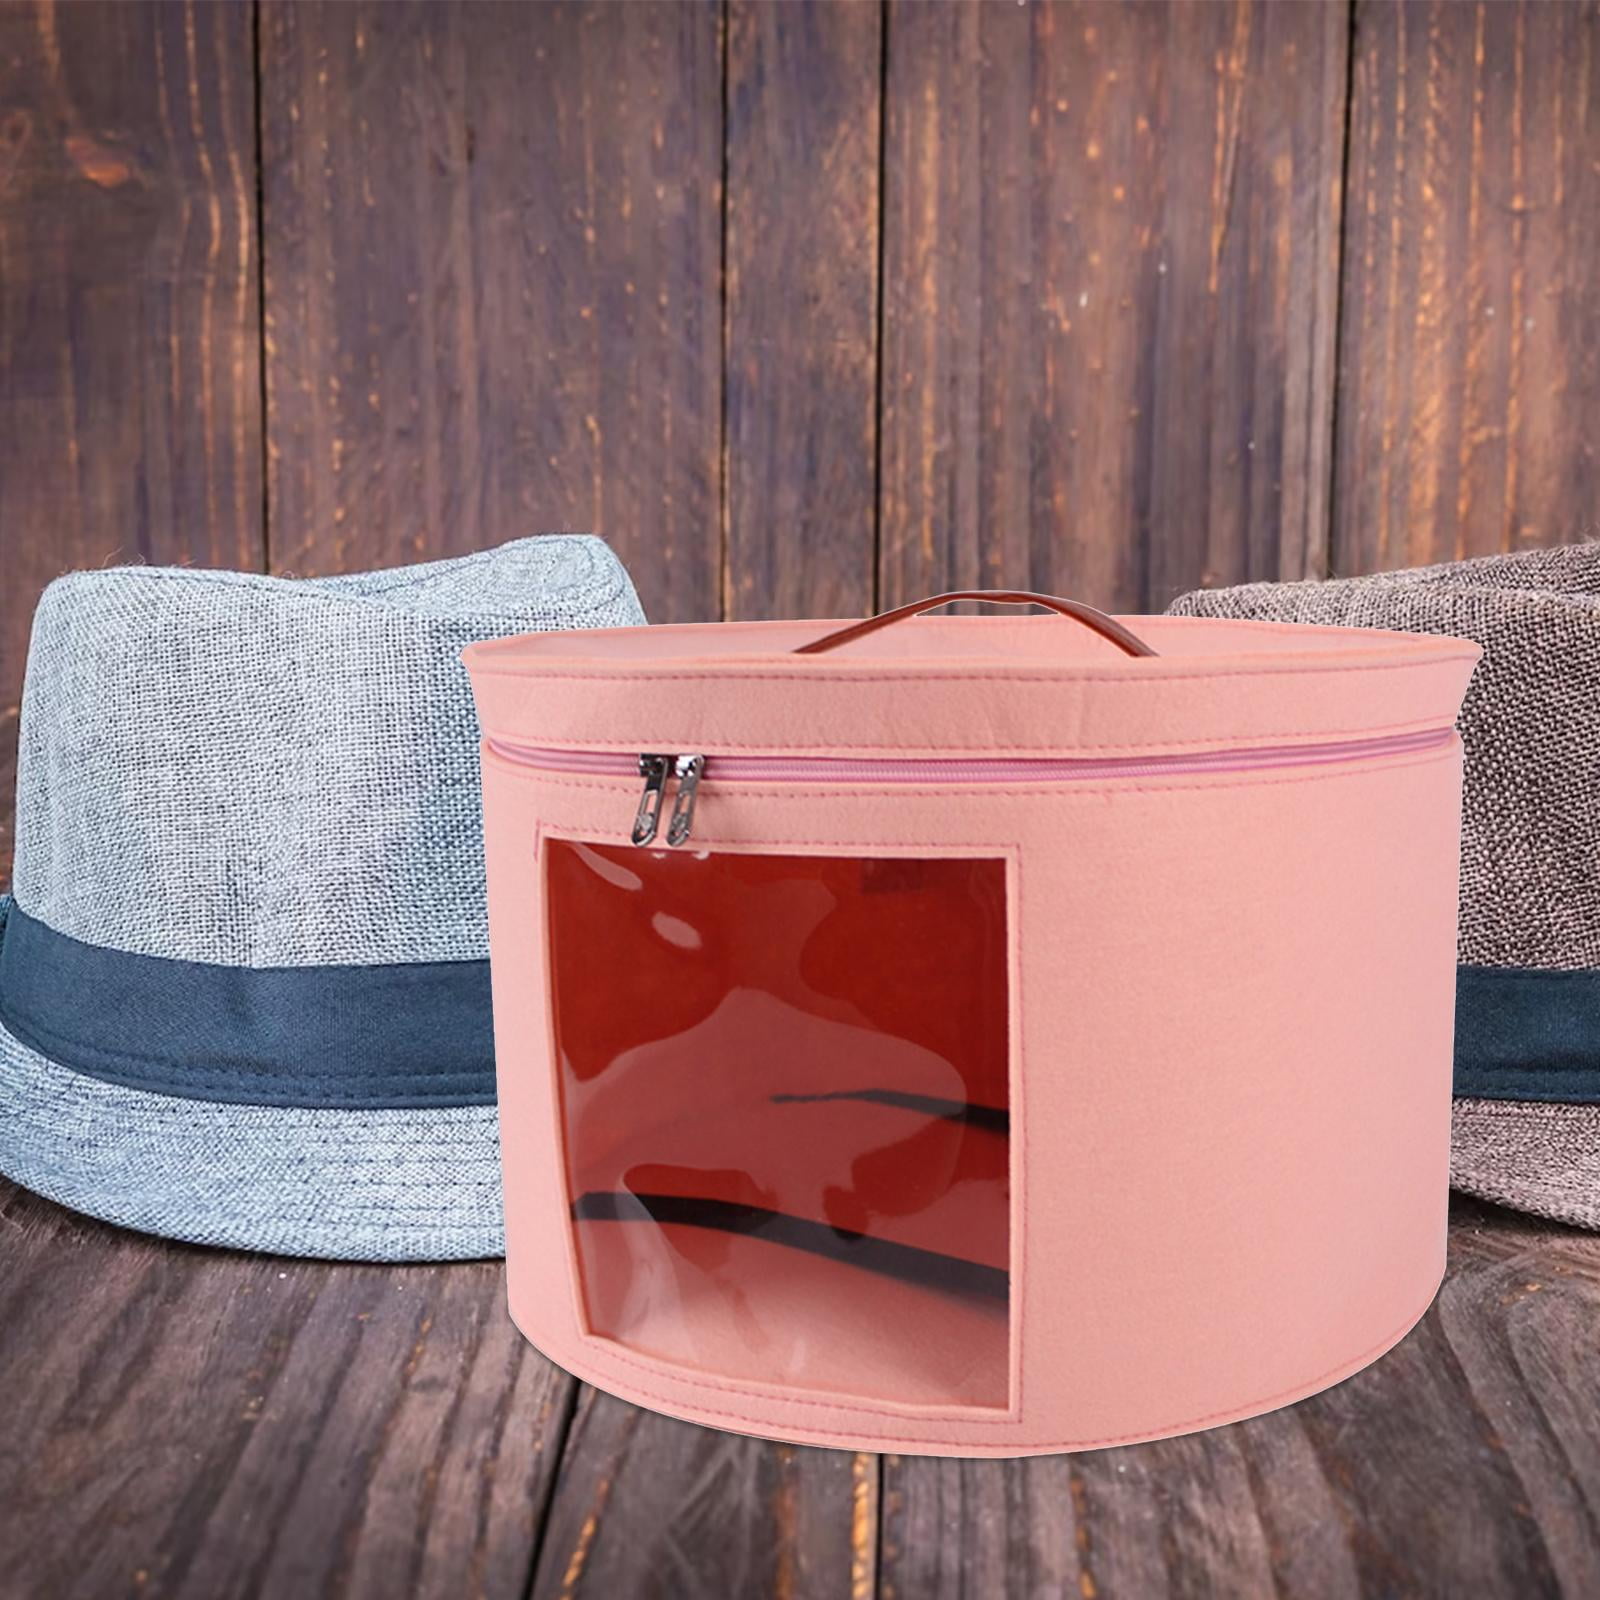 Tiure Large Hat Pop Up Bag Storage and Travel Box for Big Round Hats and Caps Expands to Required Size Keeps Out Dust and Dirt